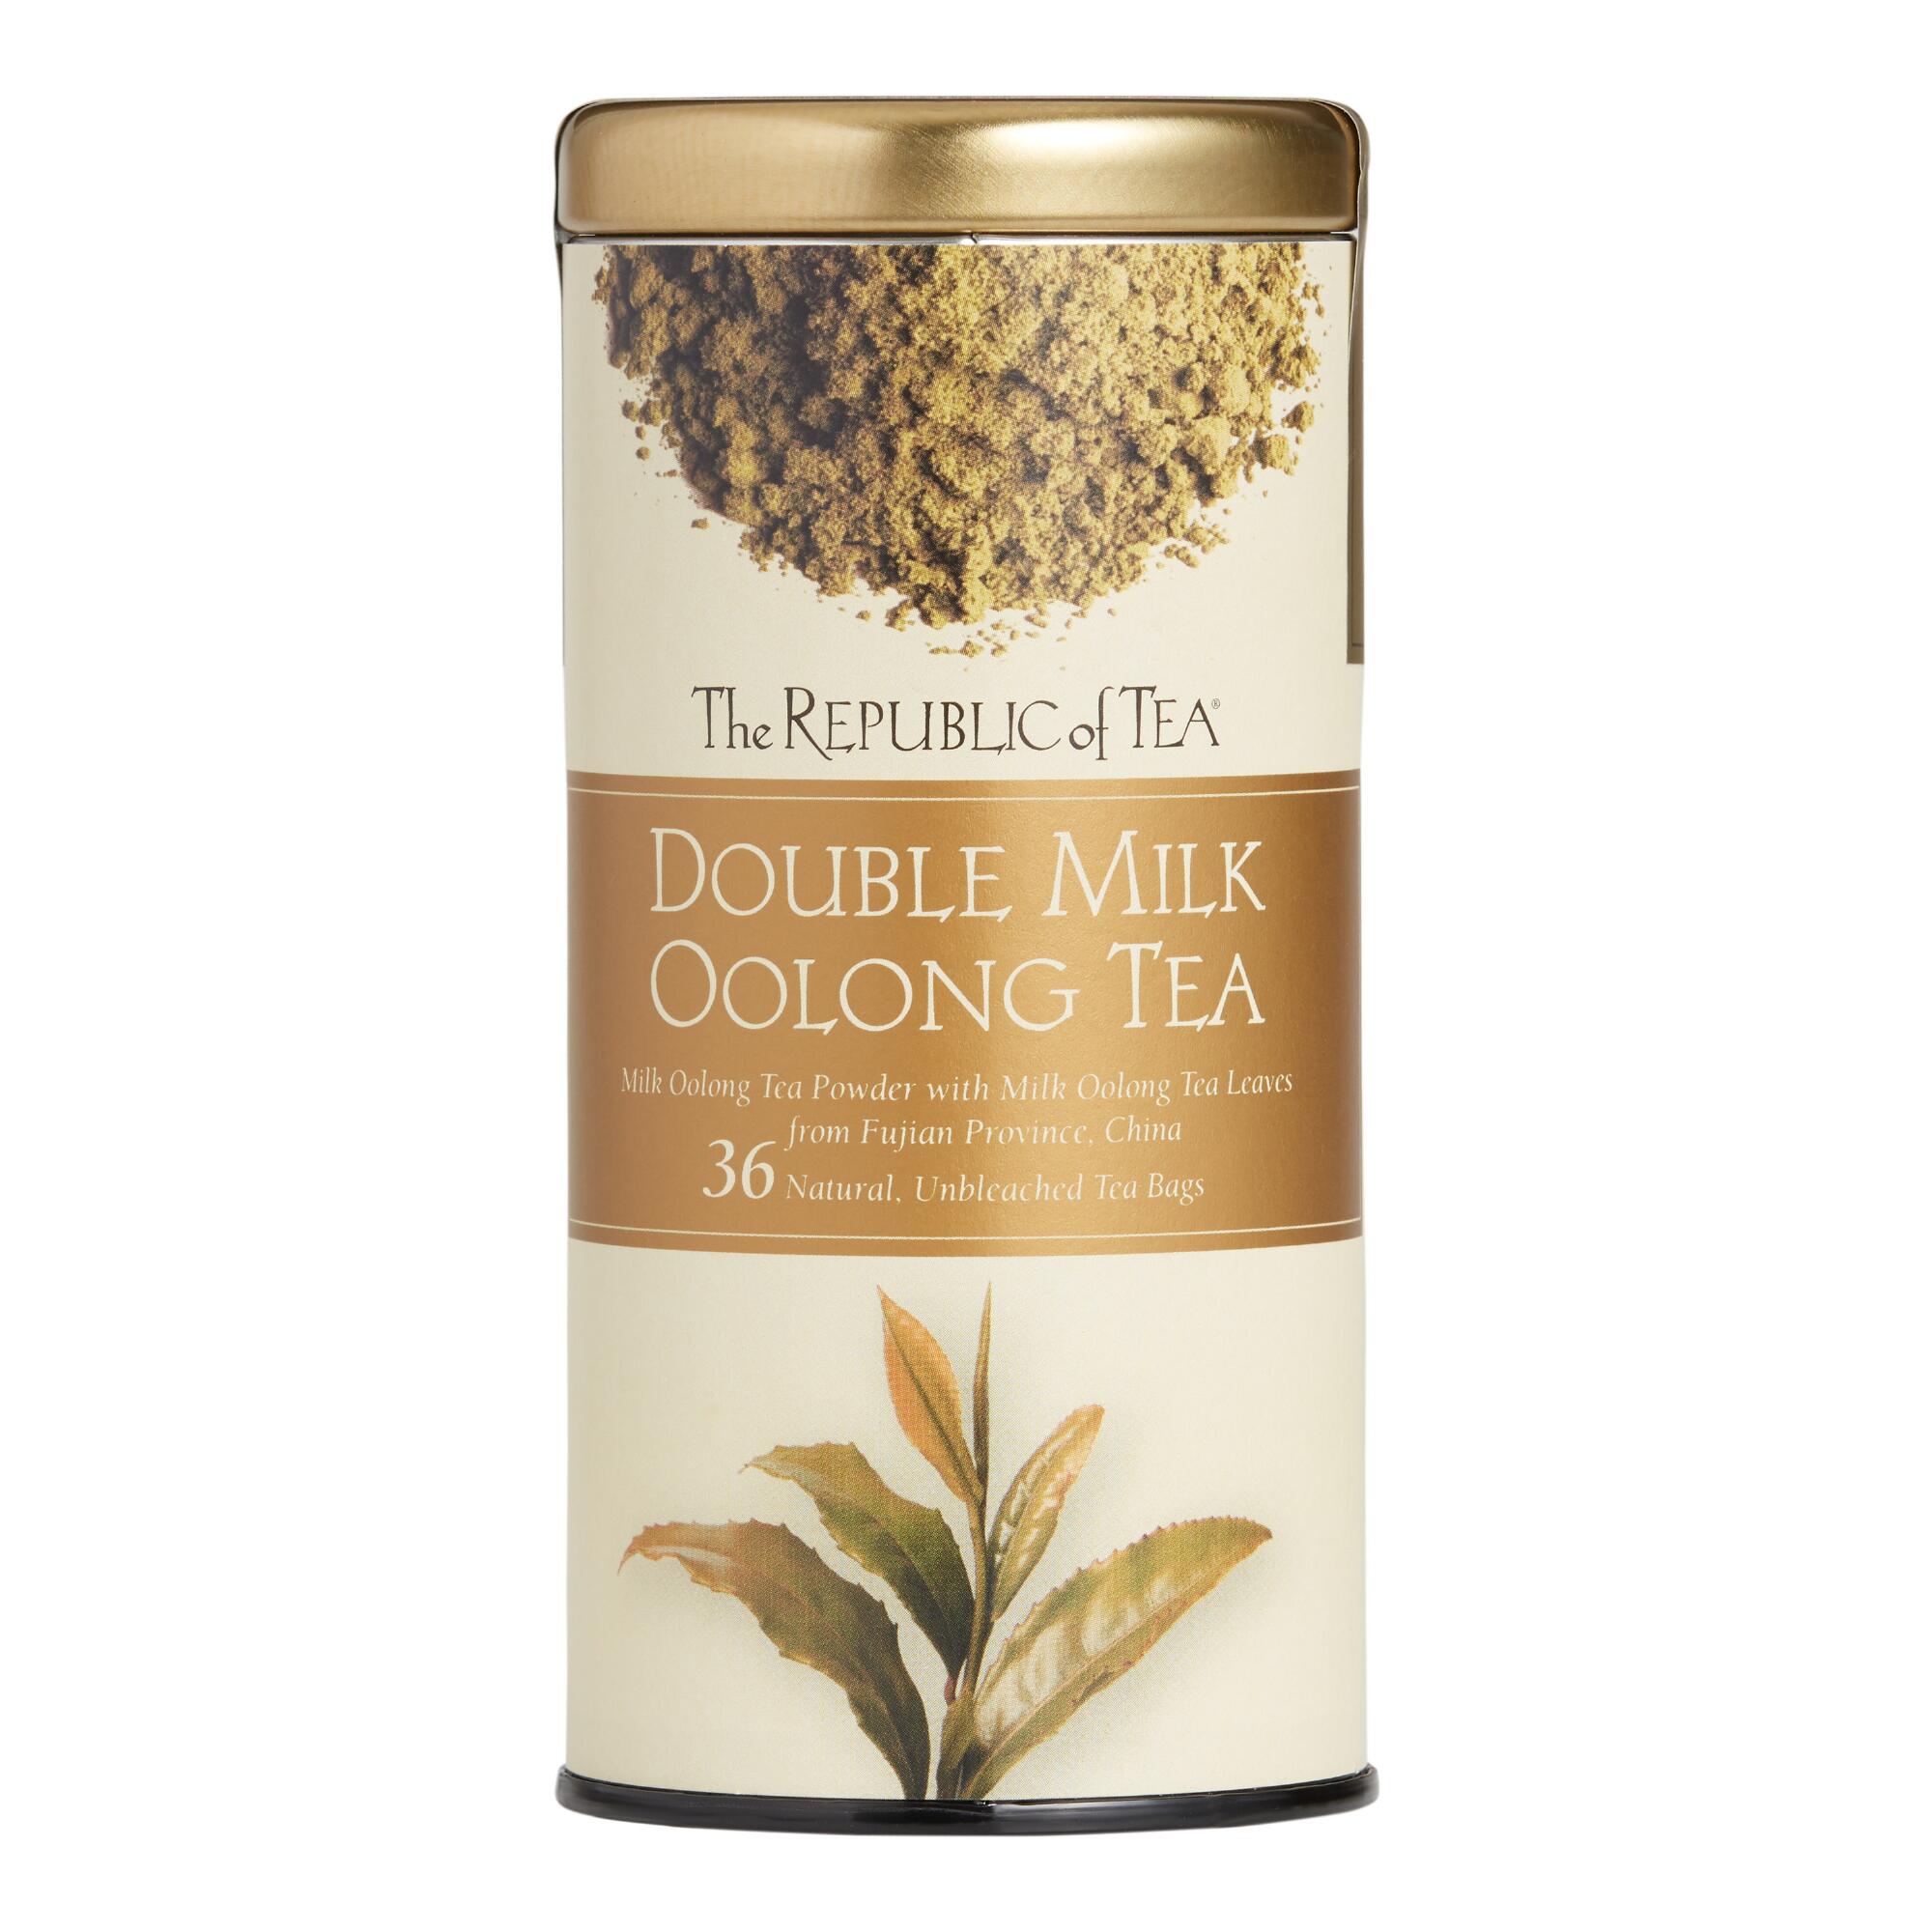 The Republic Of Tea Double Milk Oolong Tea 36 Count by World Market